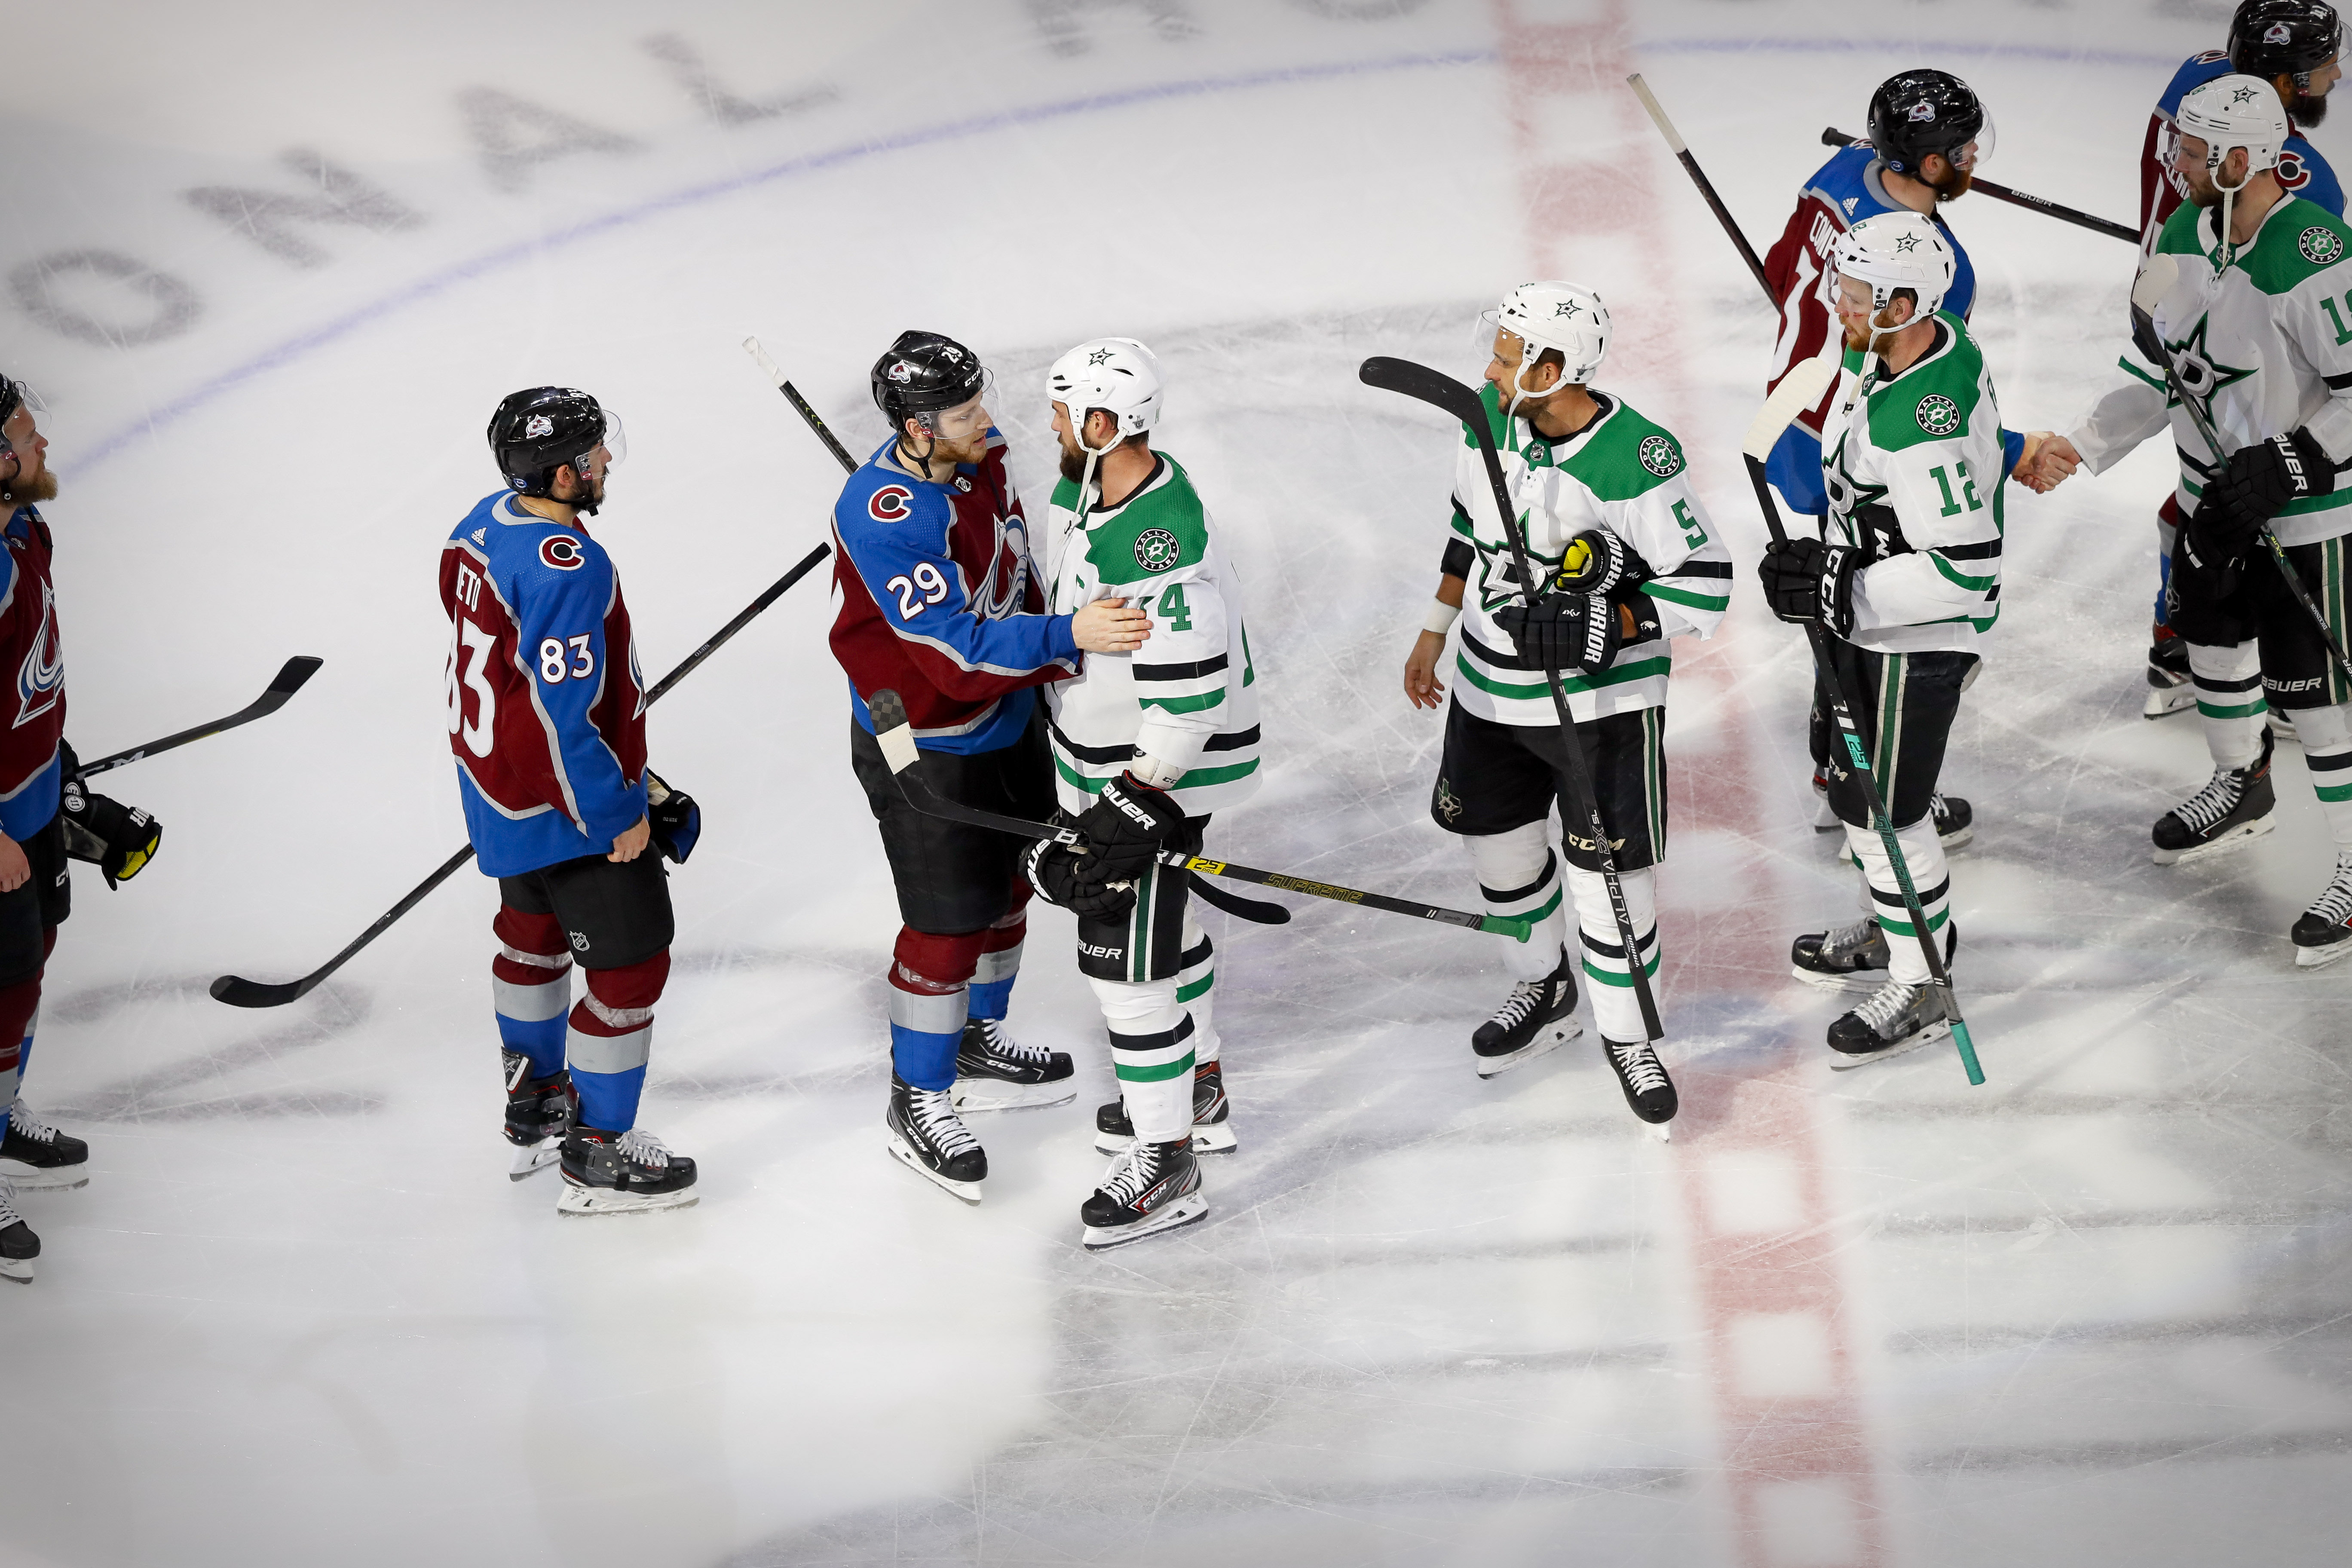 NHL: Stanley Cup Playoffs-Dallas Stars at Colorado Avalanche